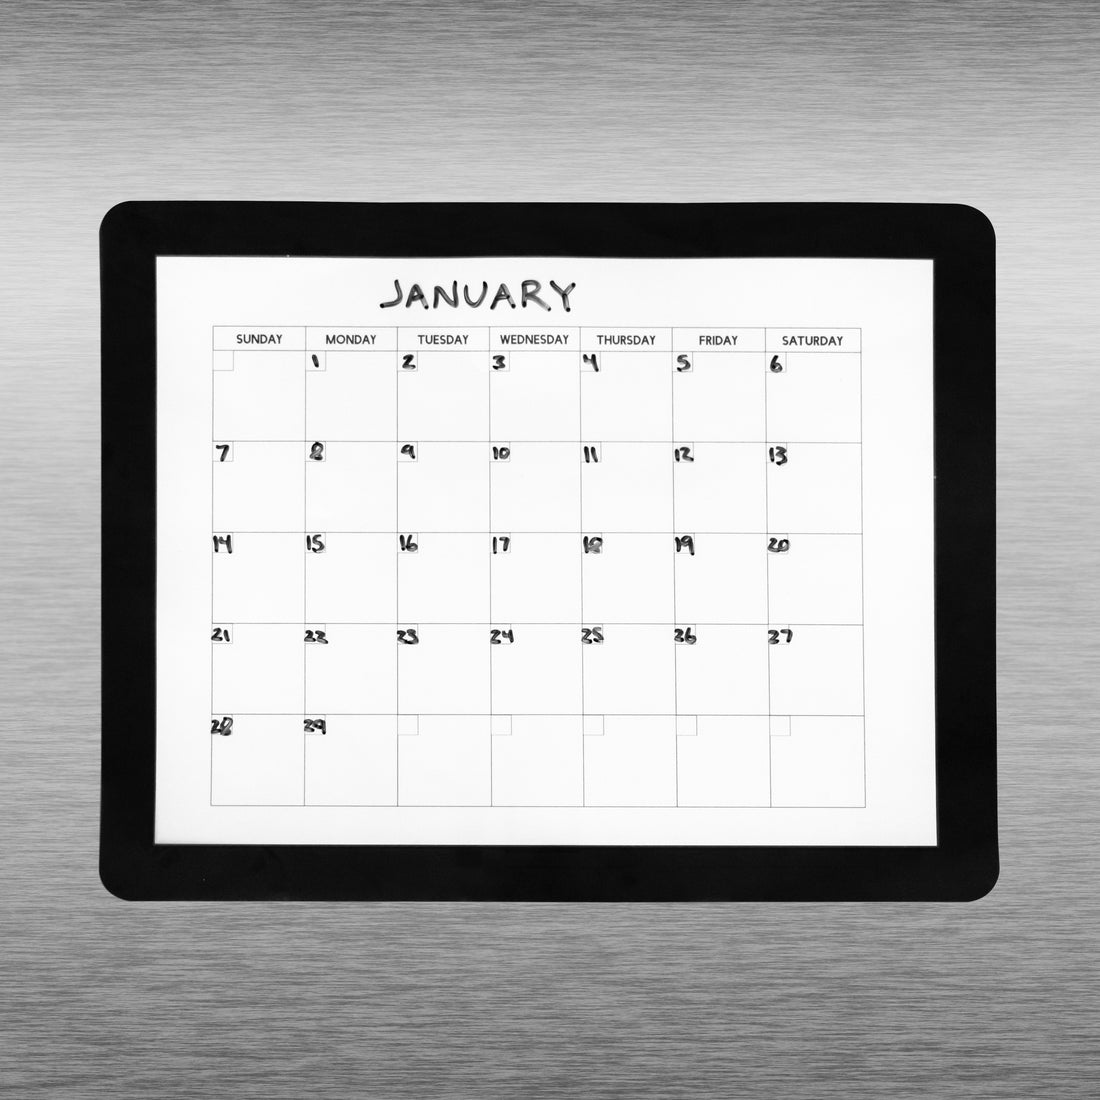 Organize Your Life with Fodeez® Frames - Keep Your Schedule and Notes in Sight